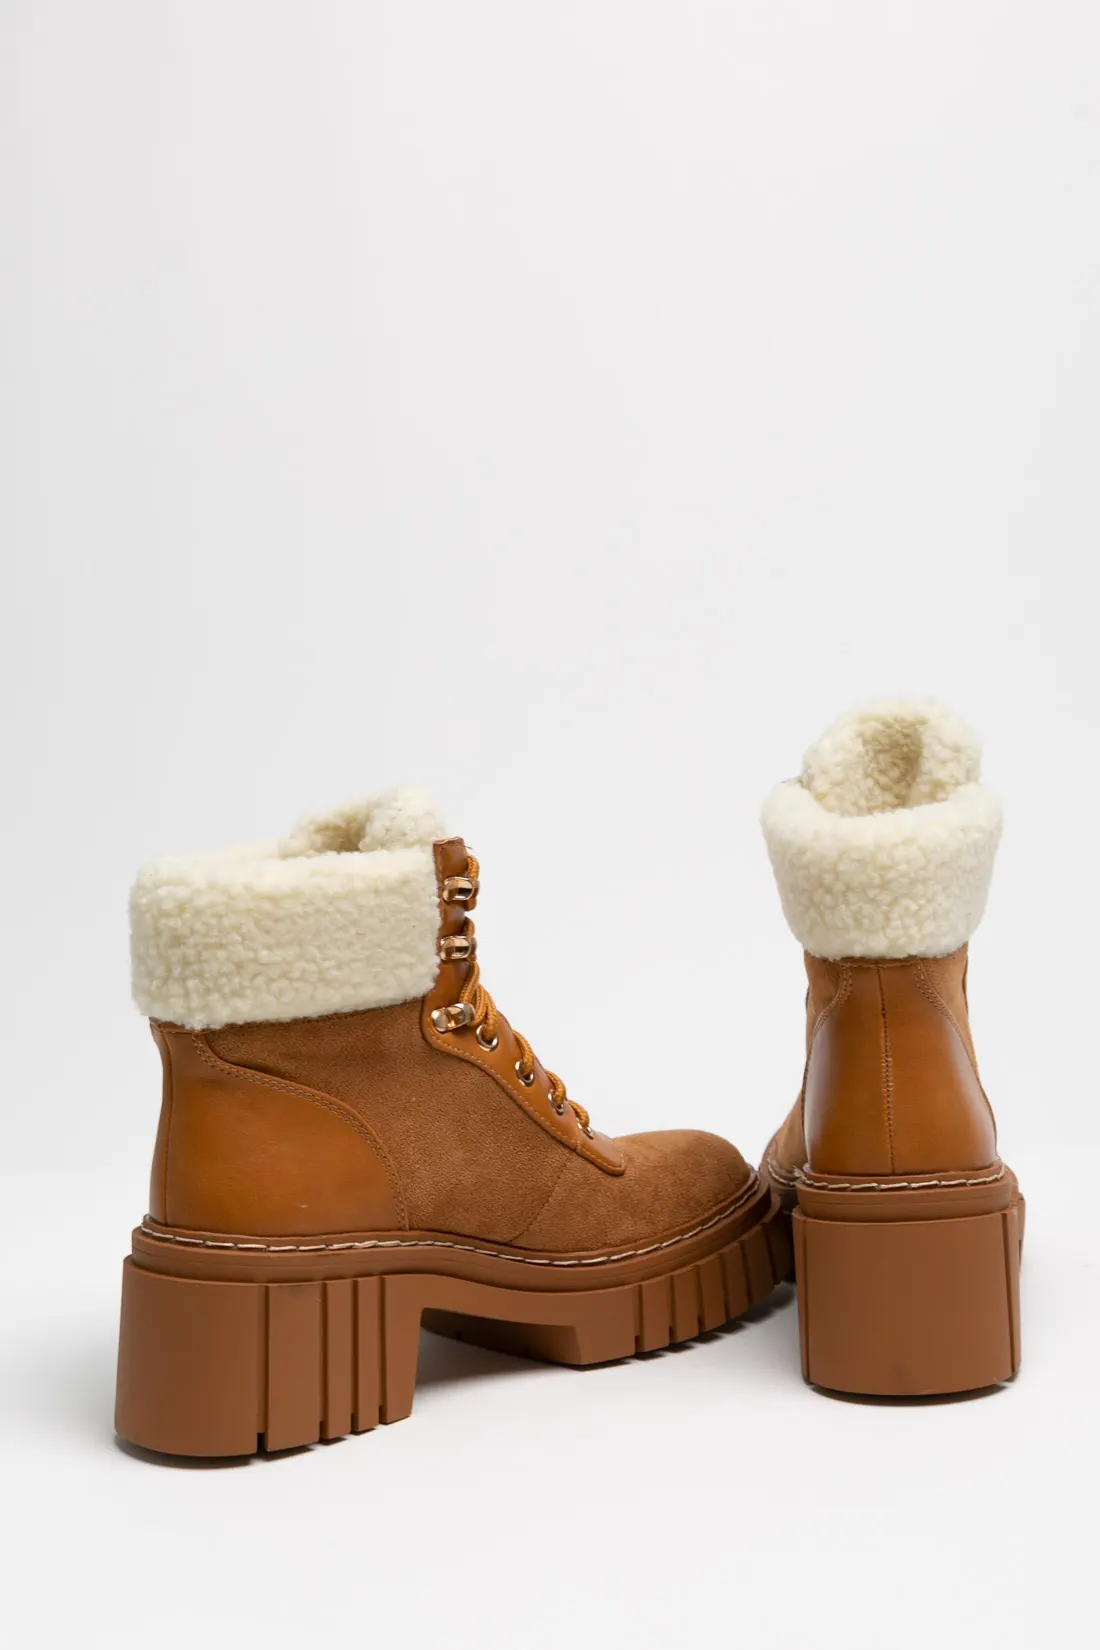 MADOBE LOW BOOT - CAMEL